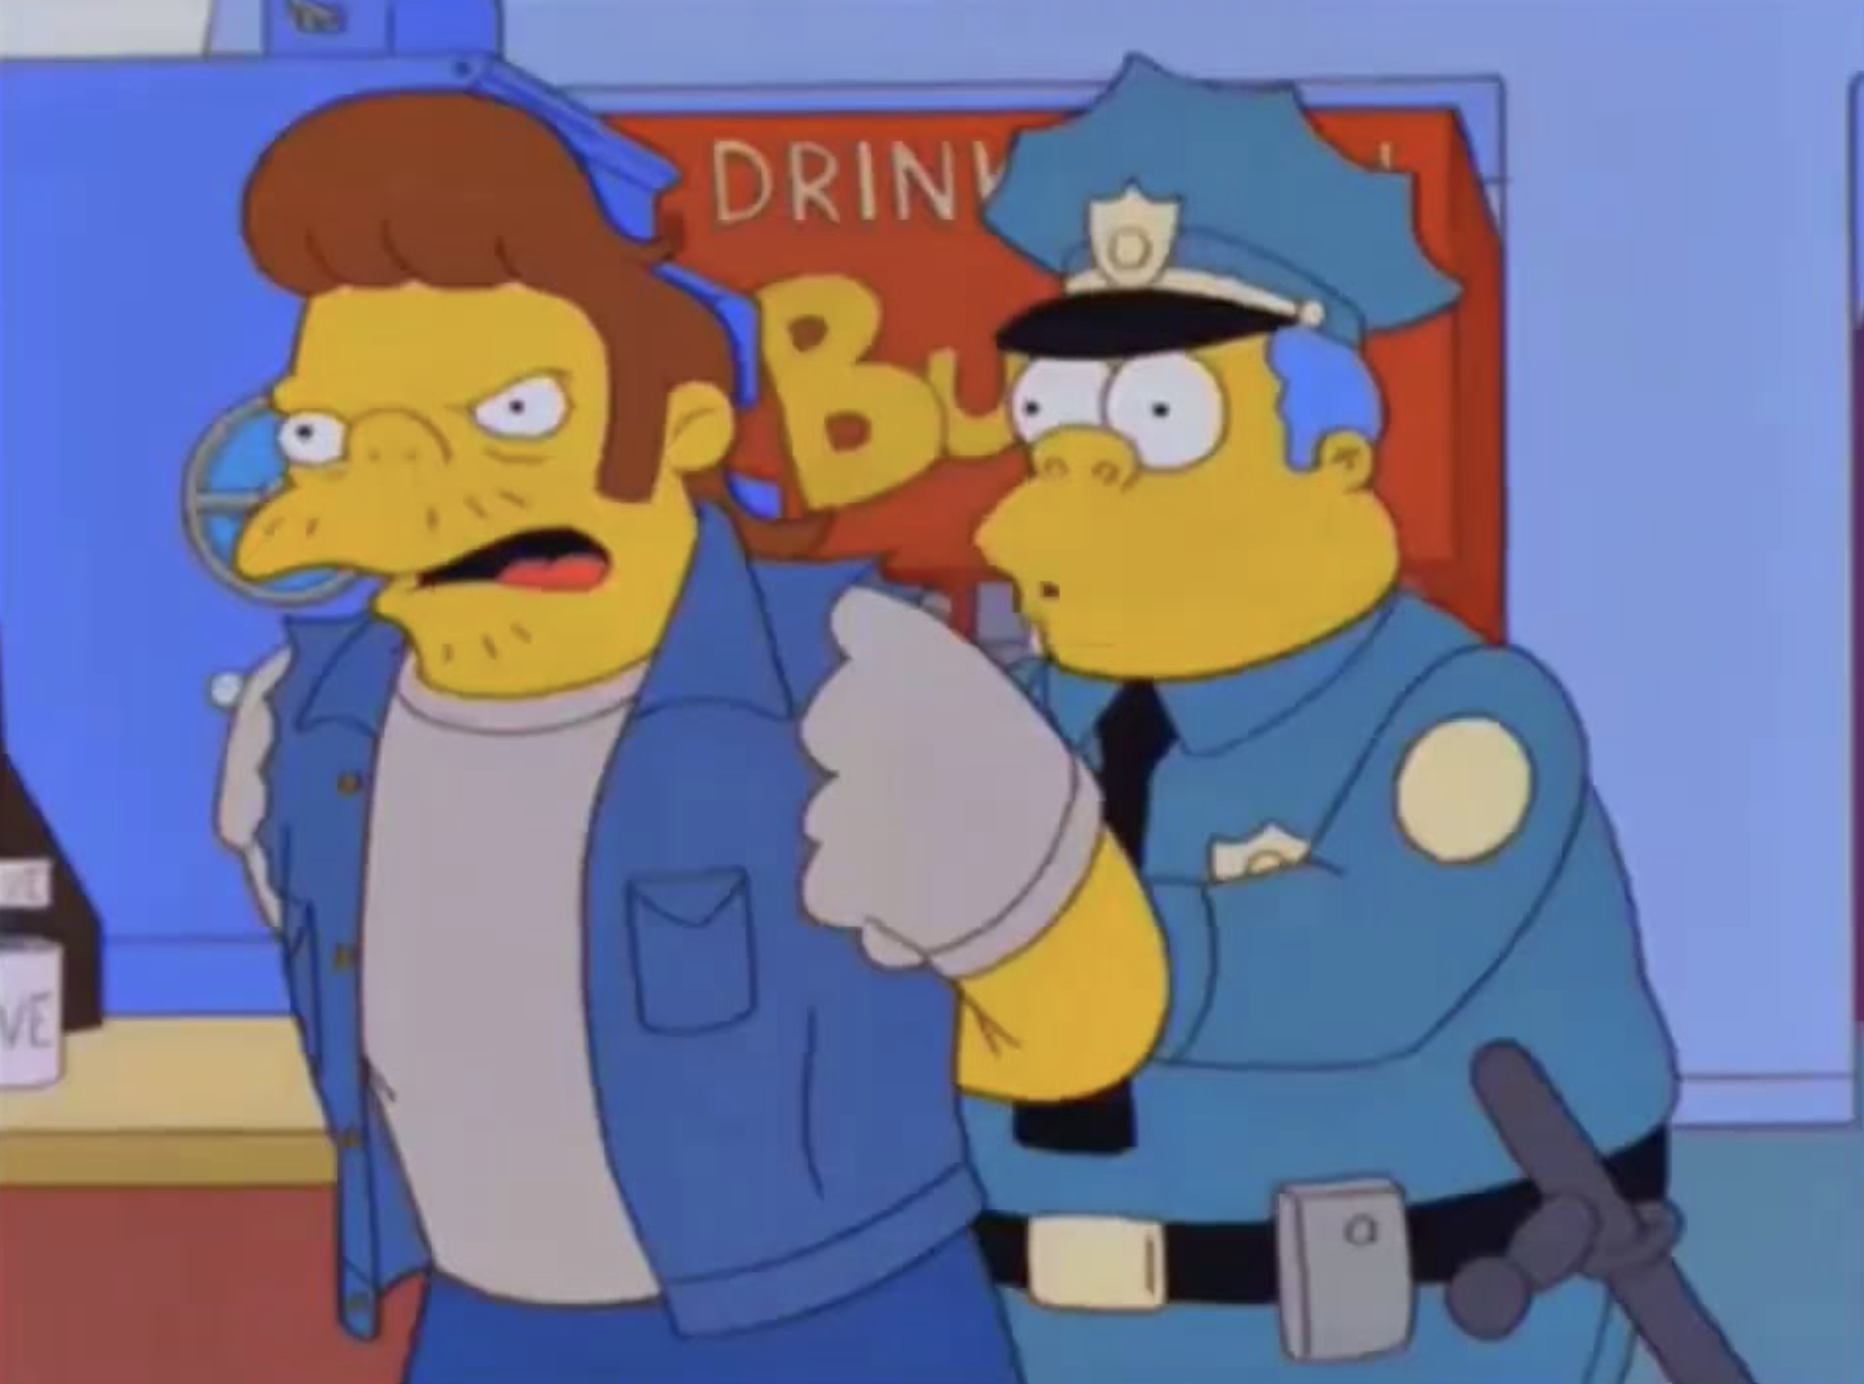 Snake, wearing a denim vest, is being put into handcuffs by Police Chief Wiggum